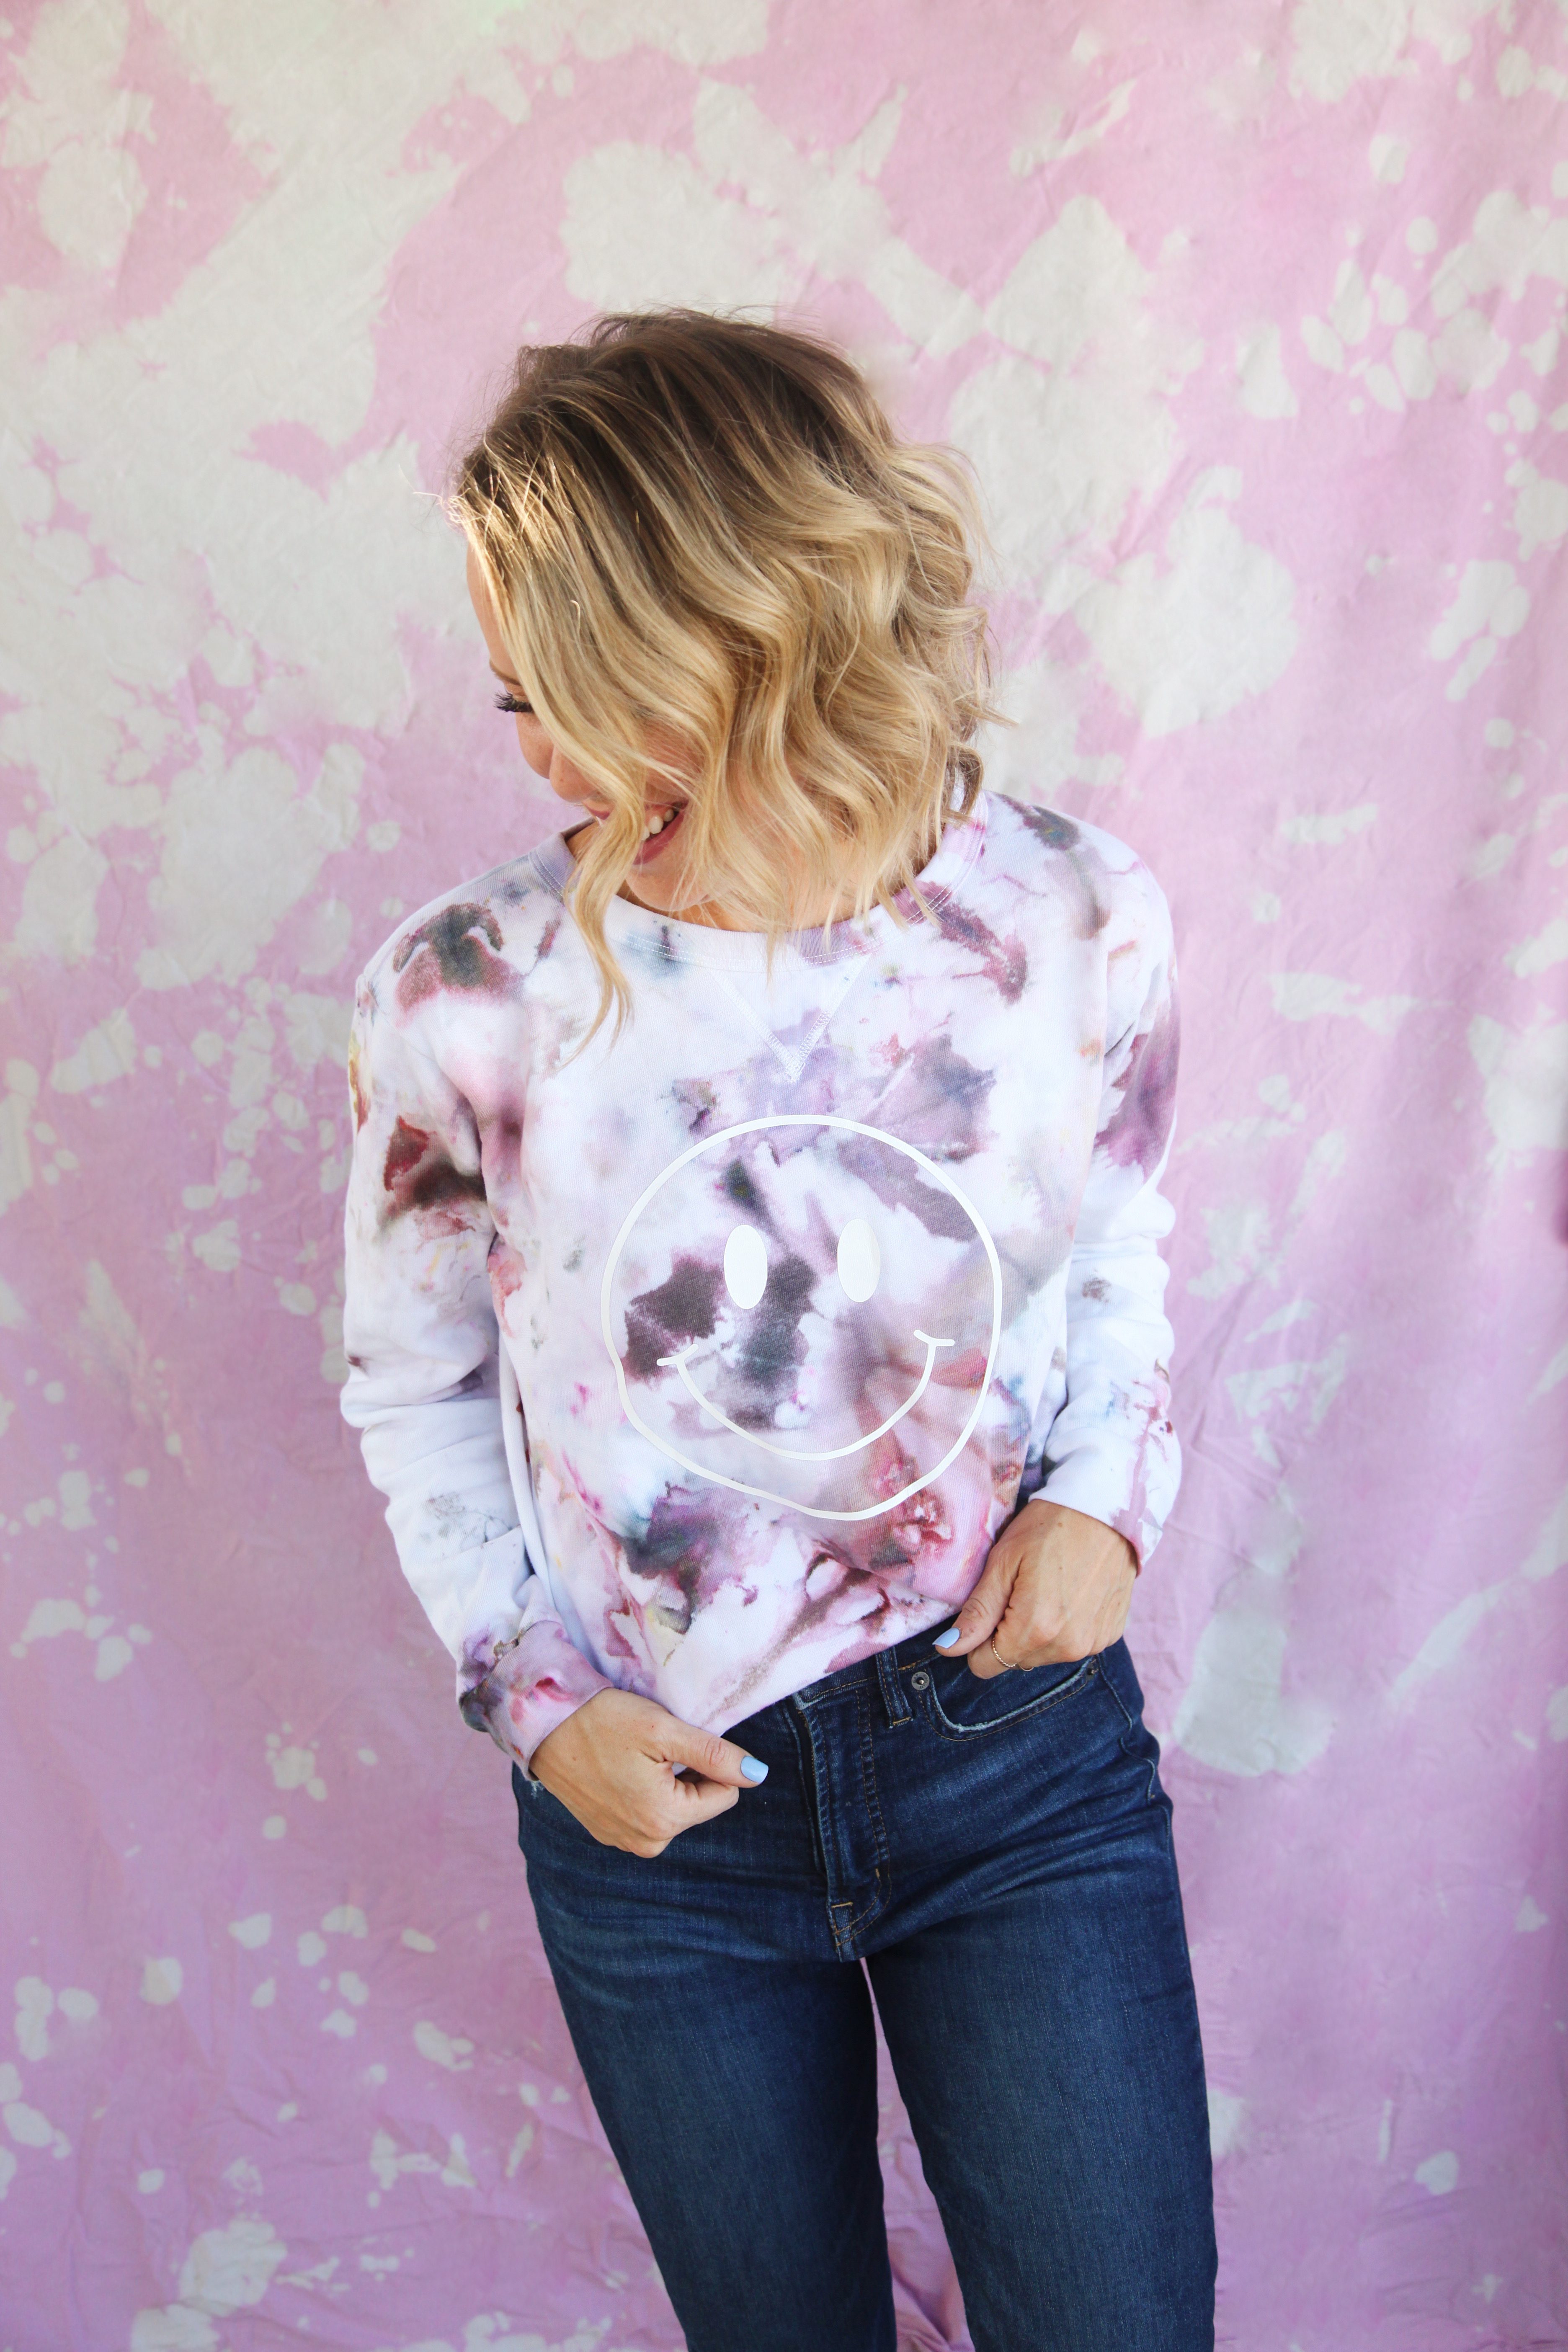 90s Inspired Ice Dye Sweatshirt Tutorial + a tutorial featured by Top US Craft Blog + The Pretty Life Girls